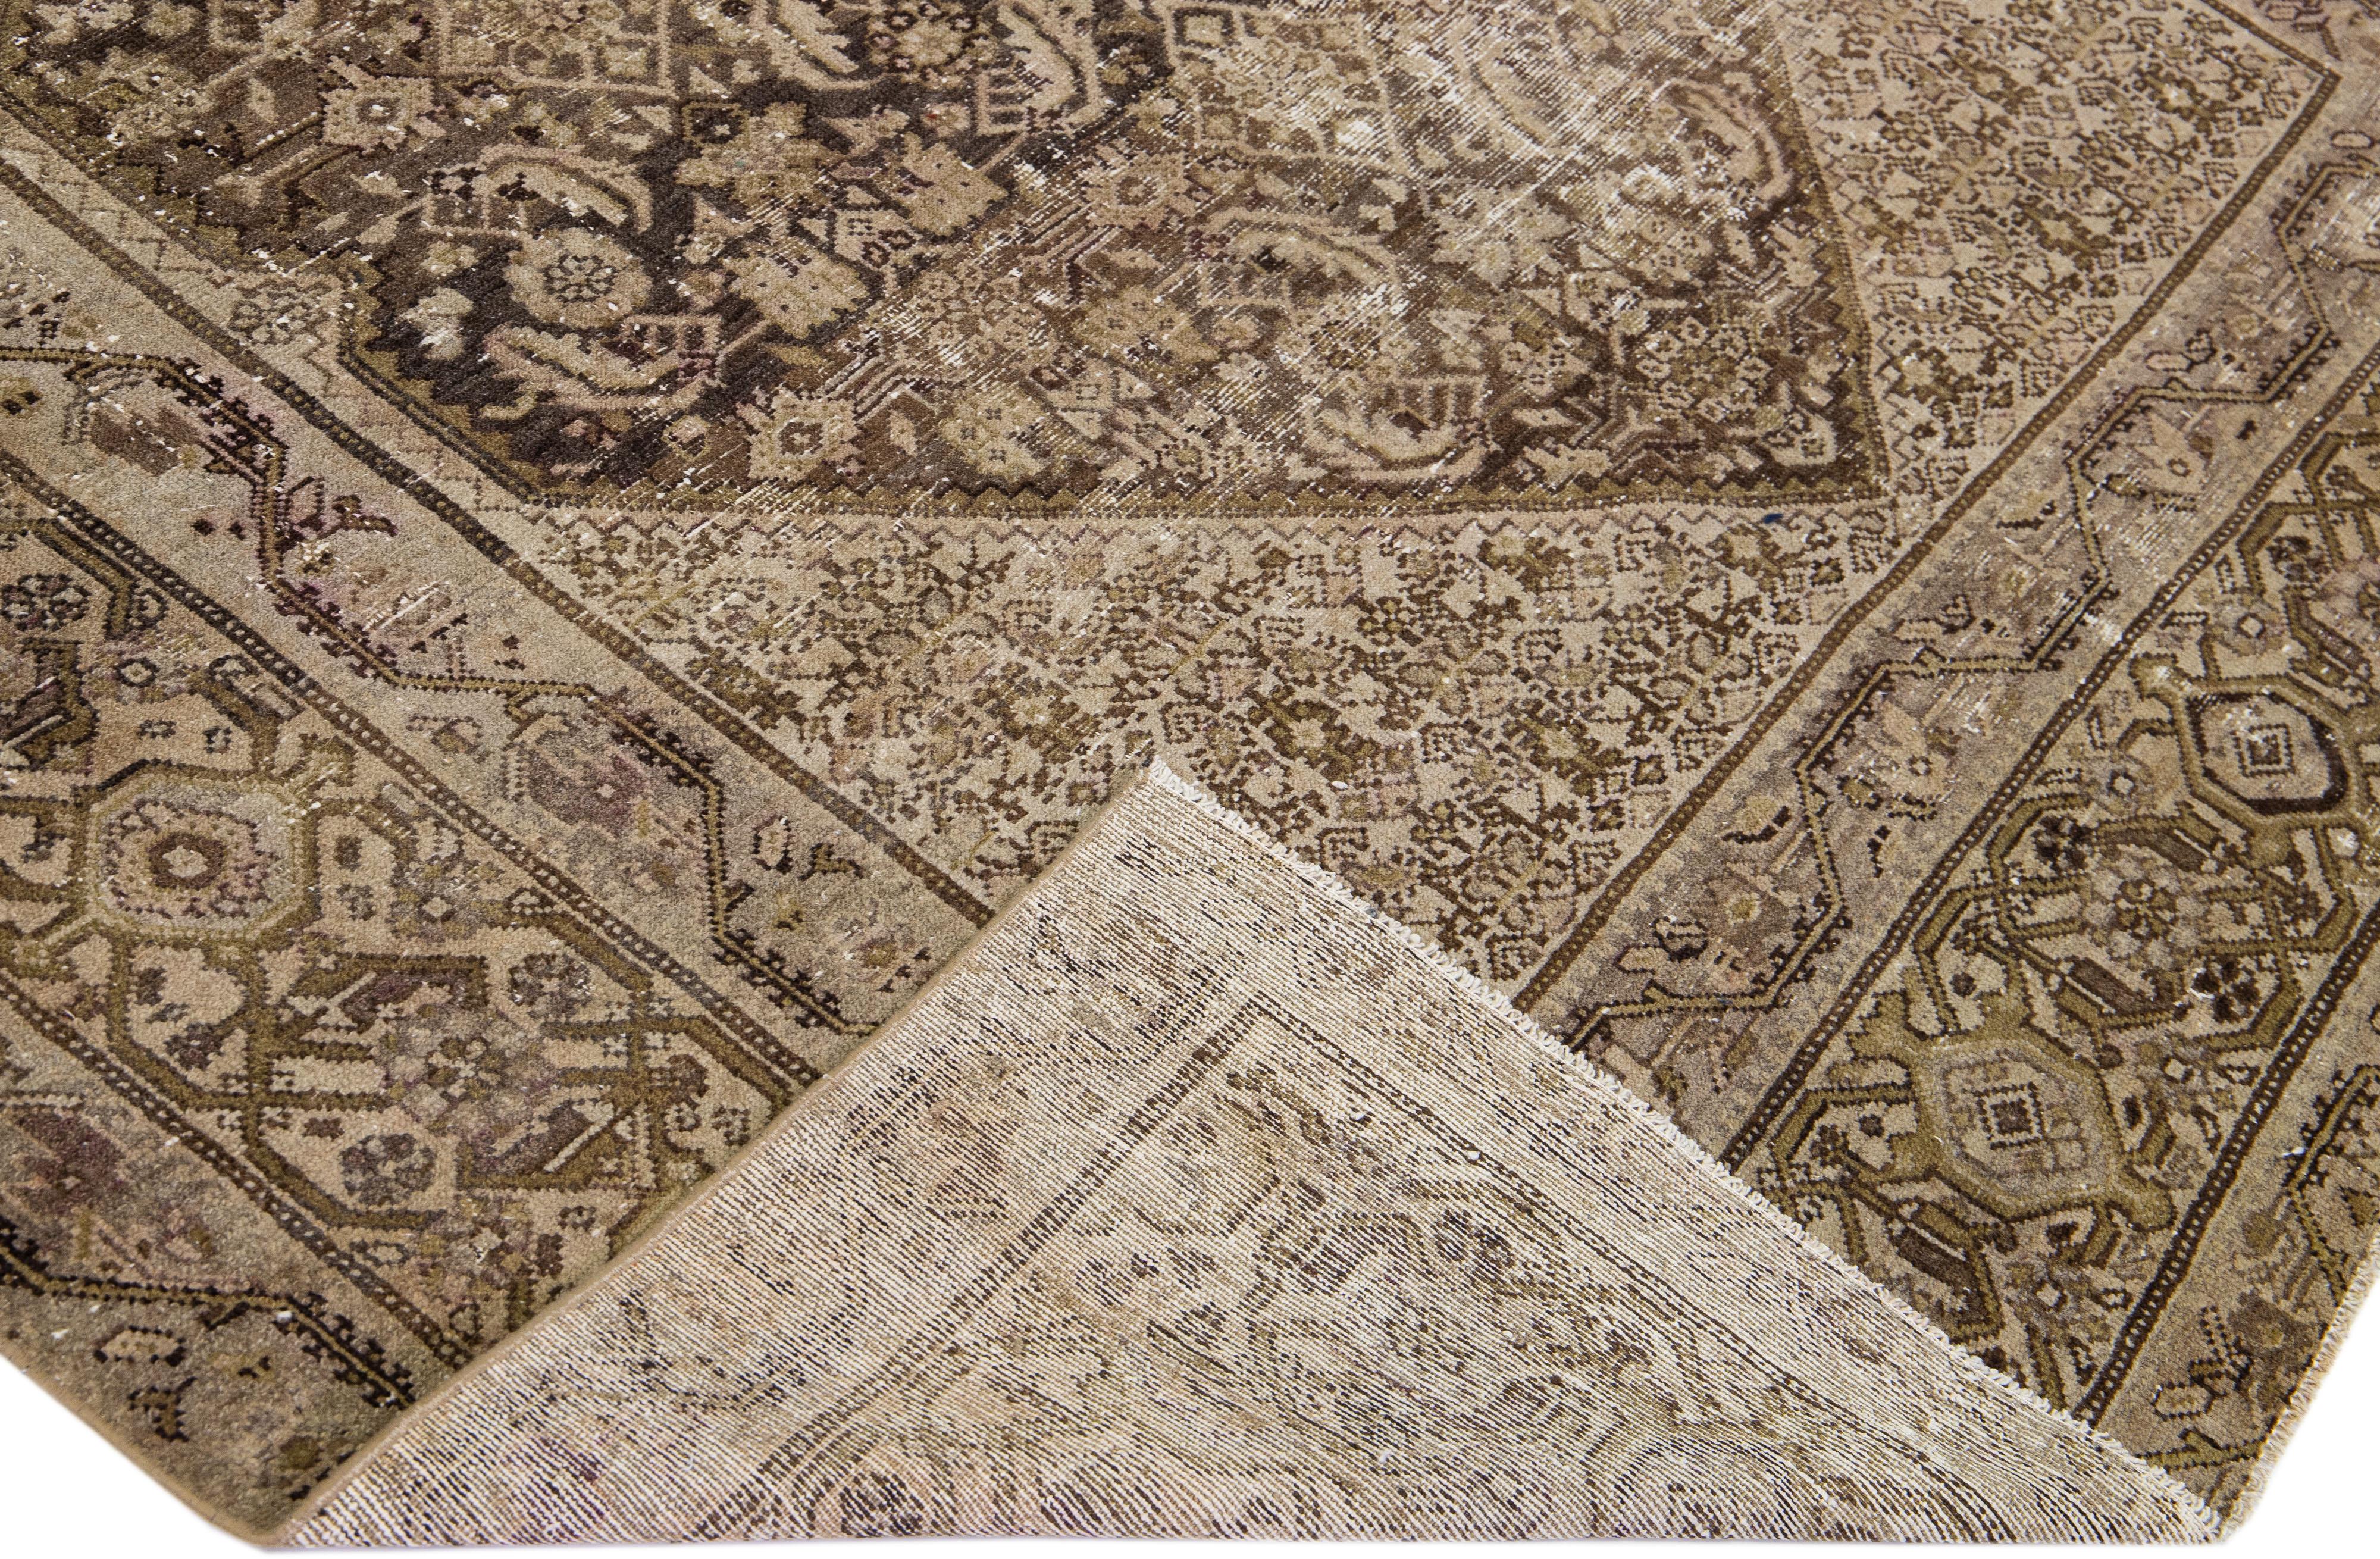 Beautiful antique Malayer hand-knotted wool rug with a brown color field. This Malayer piece has a designed frame with beige accents in a gorgeous all-over floral design.

This rug measures: 7'5